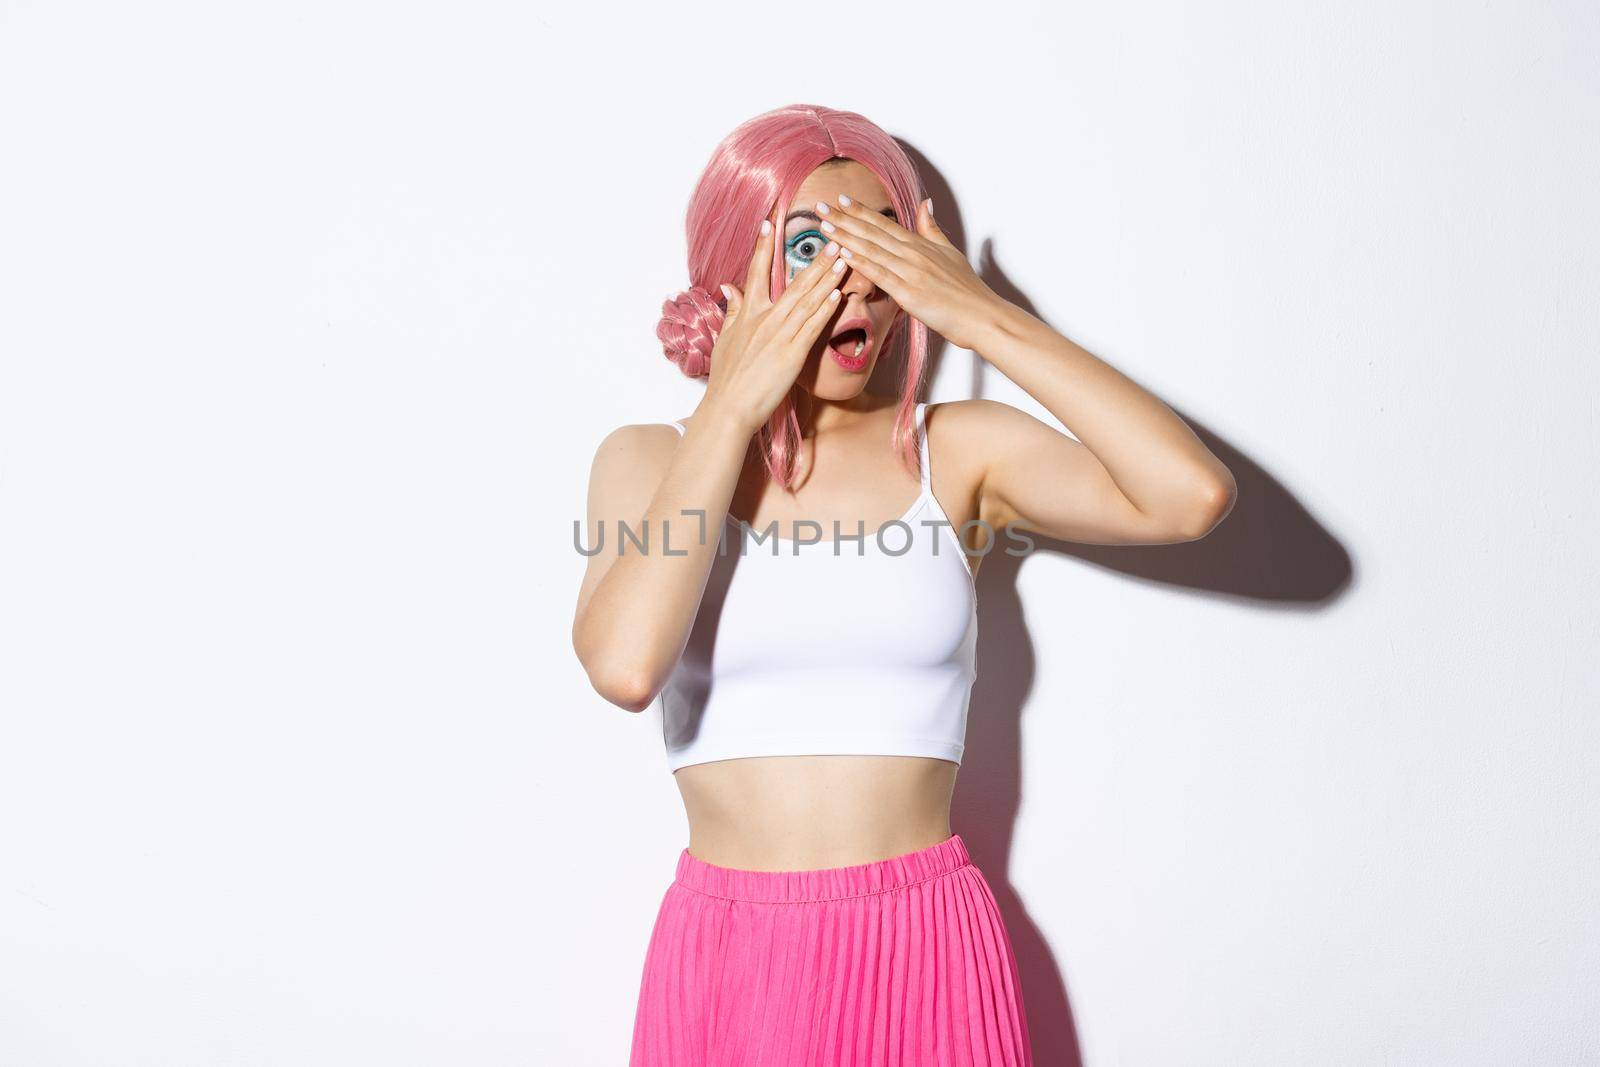 Portrait of silly pretty young woman in pink wig and halloween outfit, close eyes but peeking through fingers at something interesting.